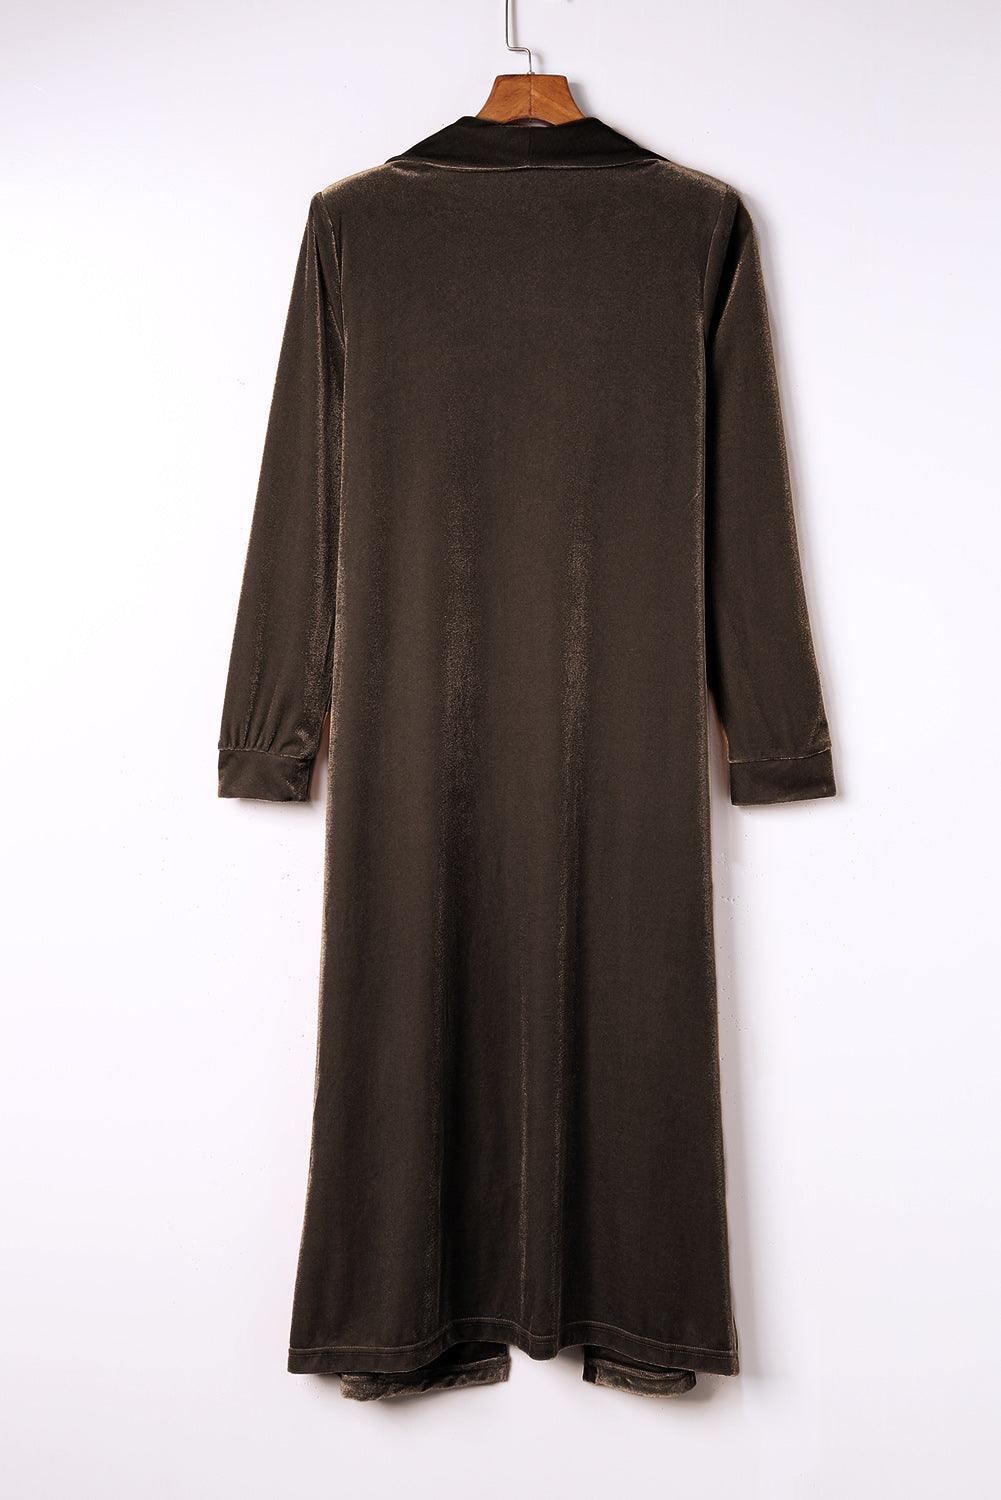 a brown dress hanging on a hanger